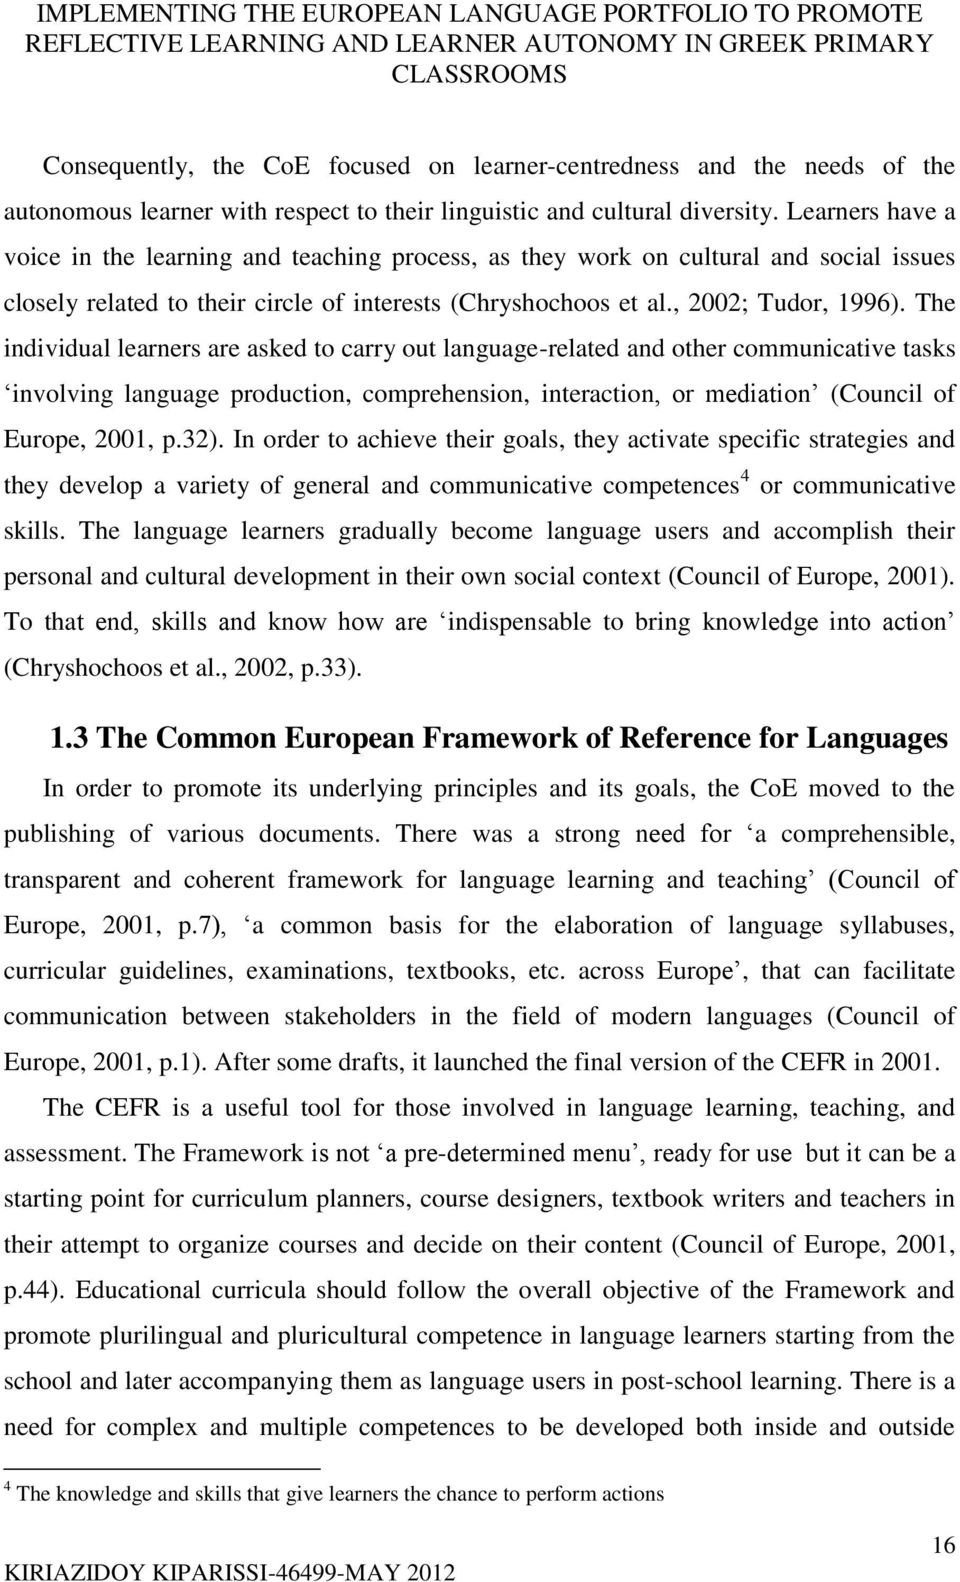 The individual learners are asked to carry out language-related and other communicative tasks involving language production, comprehension, interaction, or mediation (Council of Europe, 2001, p.32).